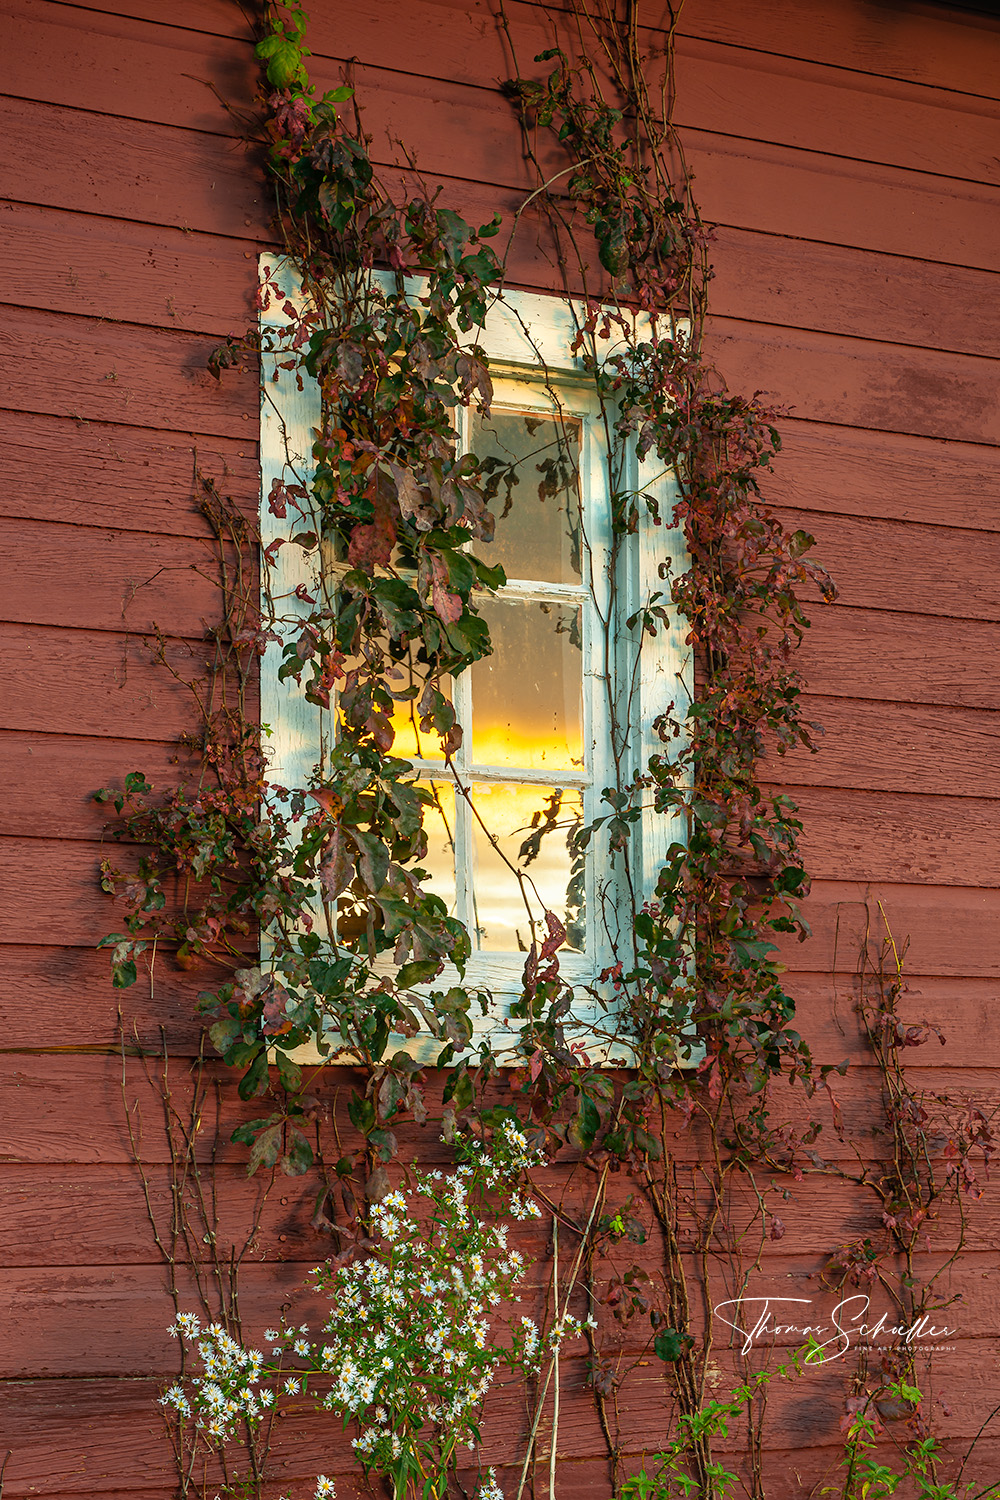 Scarlet Red Virginia Creeper Vines cling to a rustic New England barn as the setting sun reflects off the window | Fine Art nature photography prints